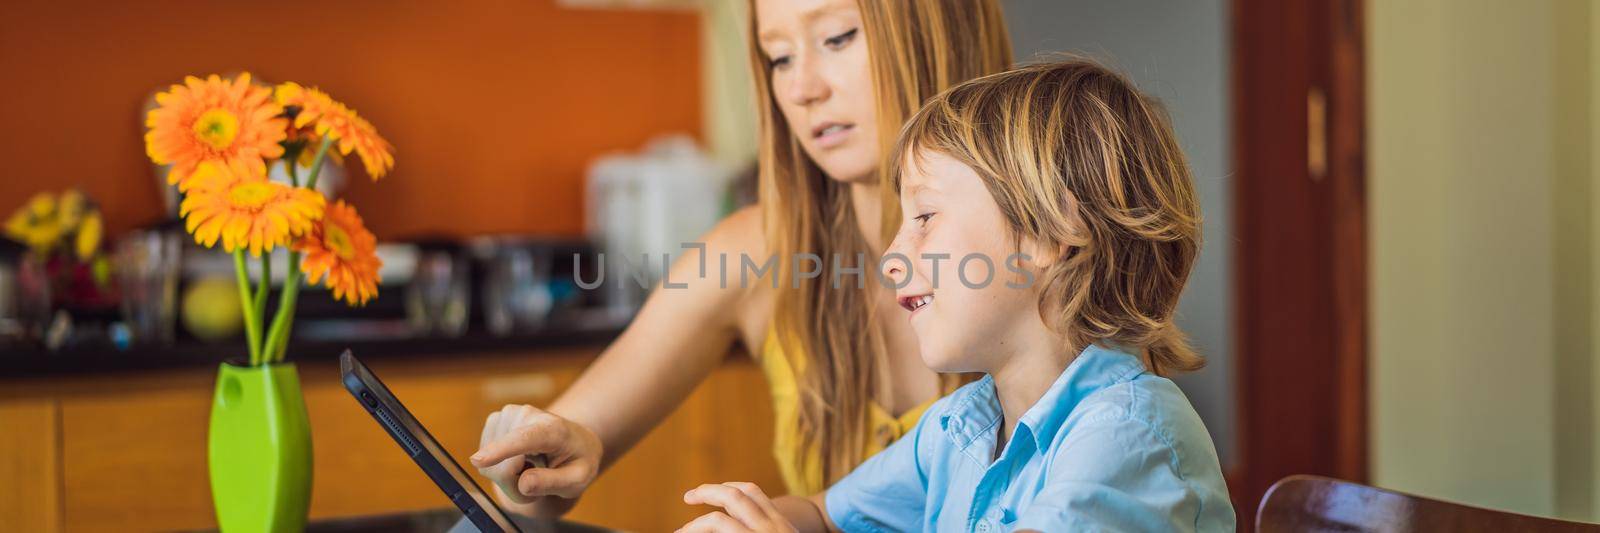 A boy studying online at home using a tablet. Mom helps him learn. Studying during quarantine. Global pandemic covid19 virus. BANNER, LONG FORMAT